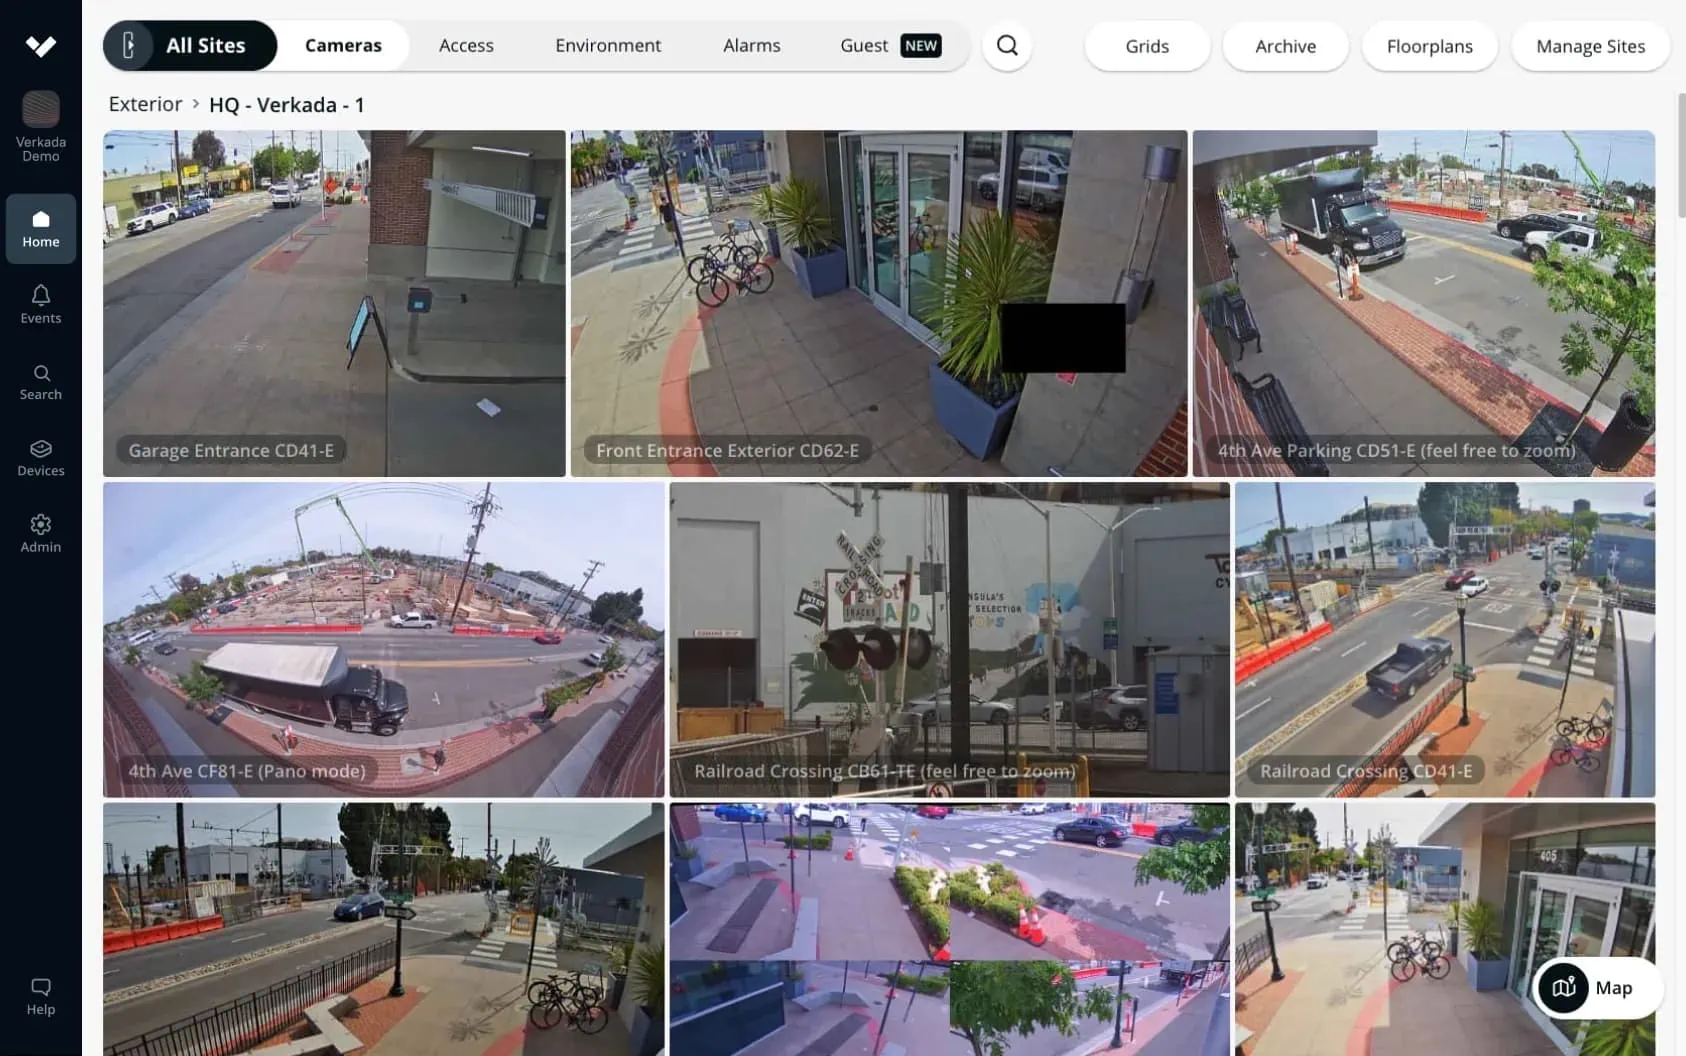 Remote monitoring footage from security cameras of a business in Chattanooga, TN